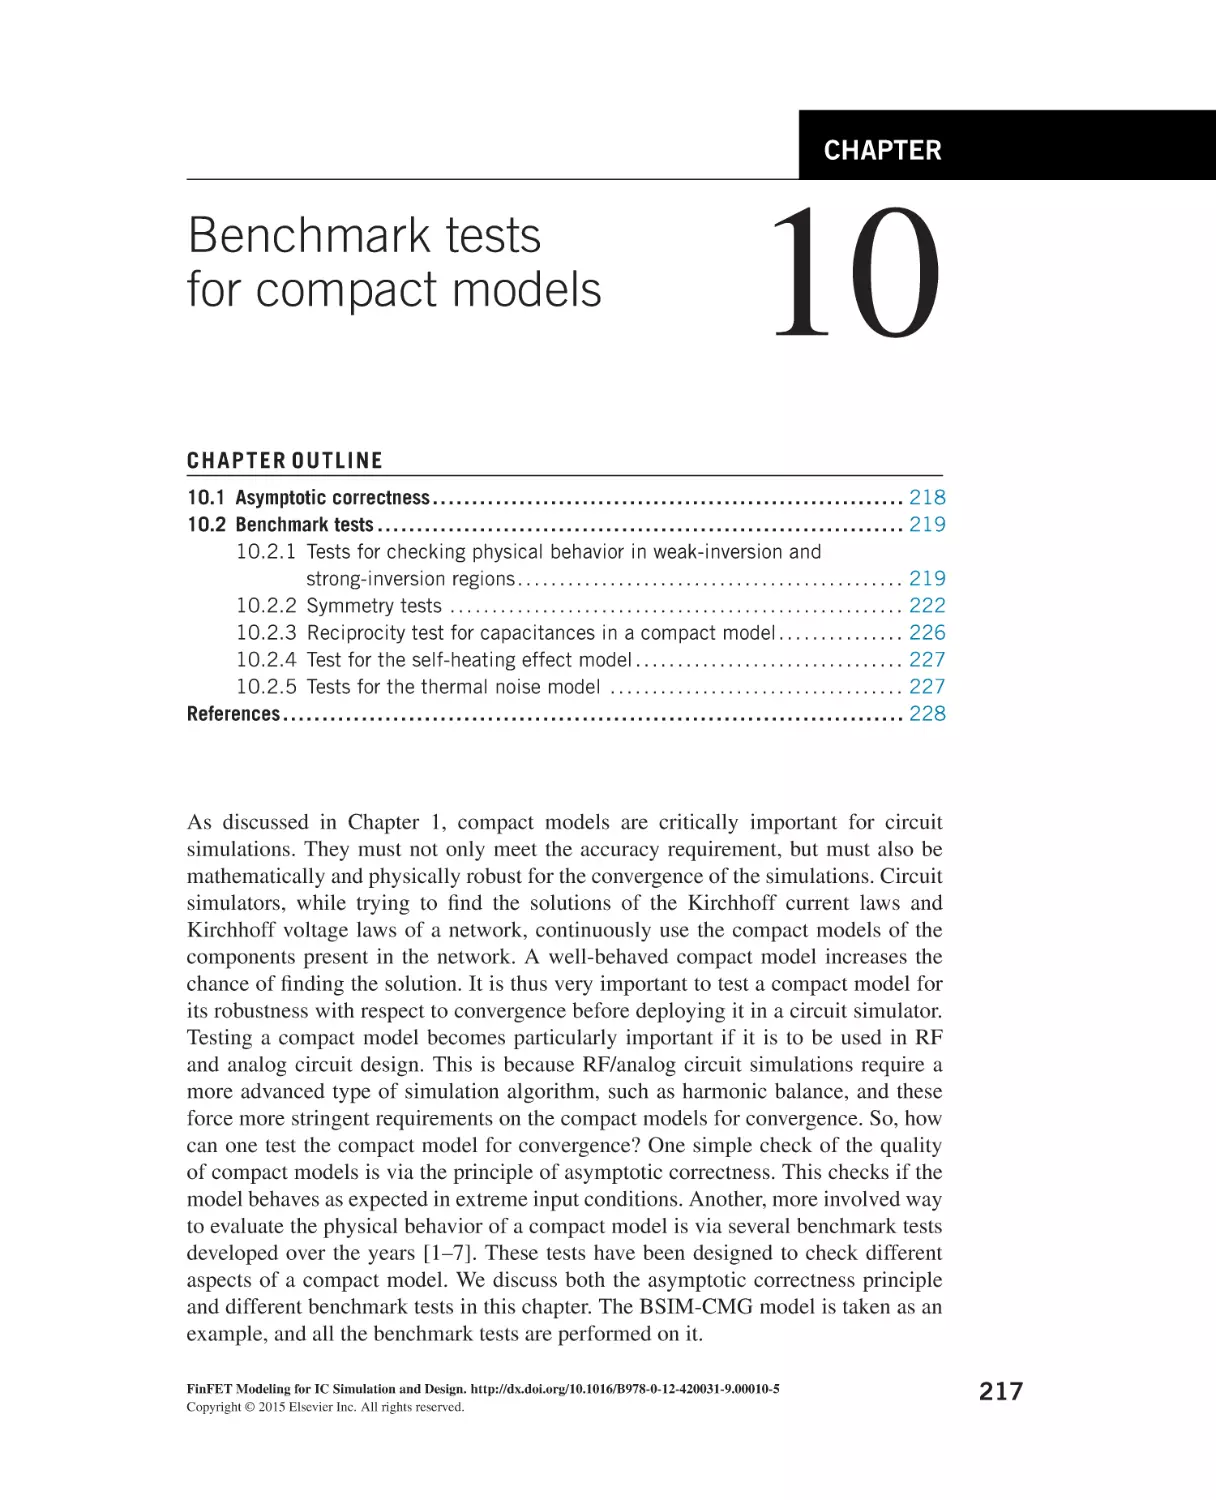 Benchmark tests for compact models